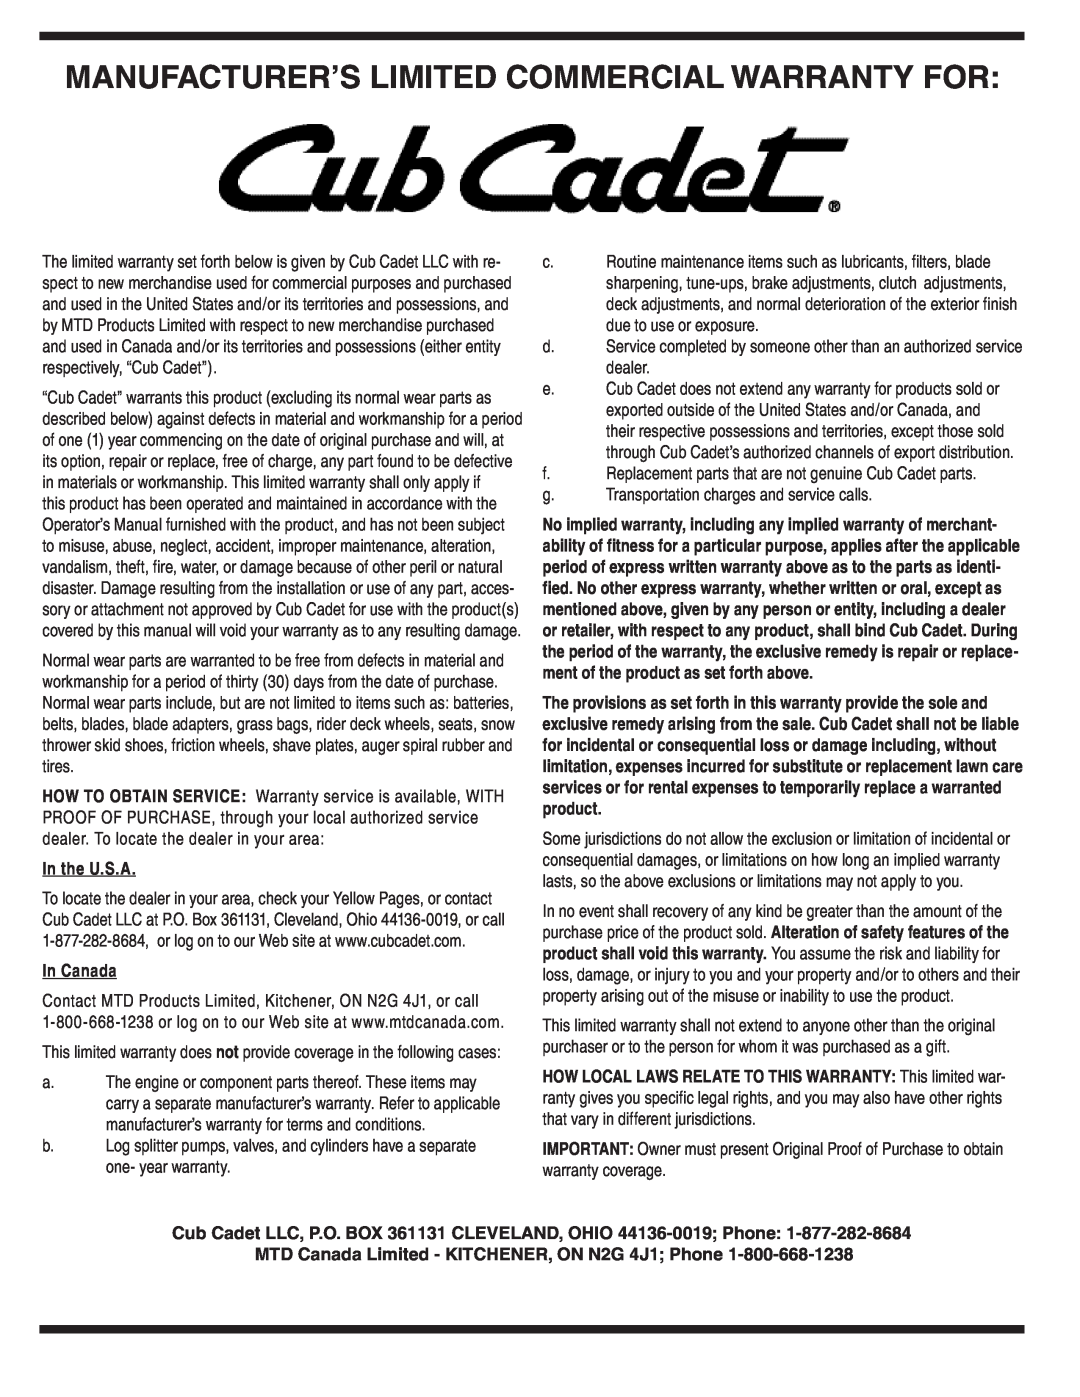 Cub Cadet WE 26 warranty Manufacturer’S Limited Commercial Warranty For, In the U.S.A, In Canada 